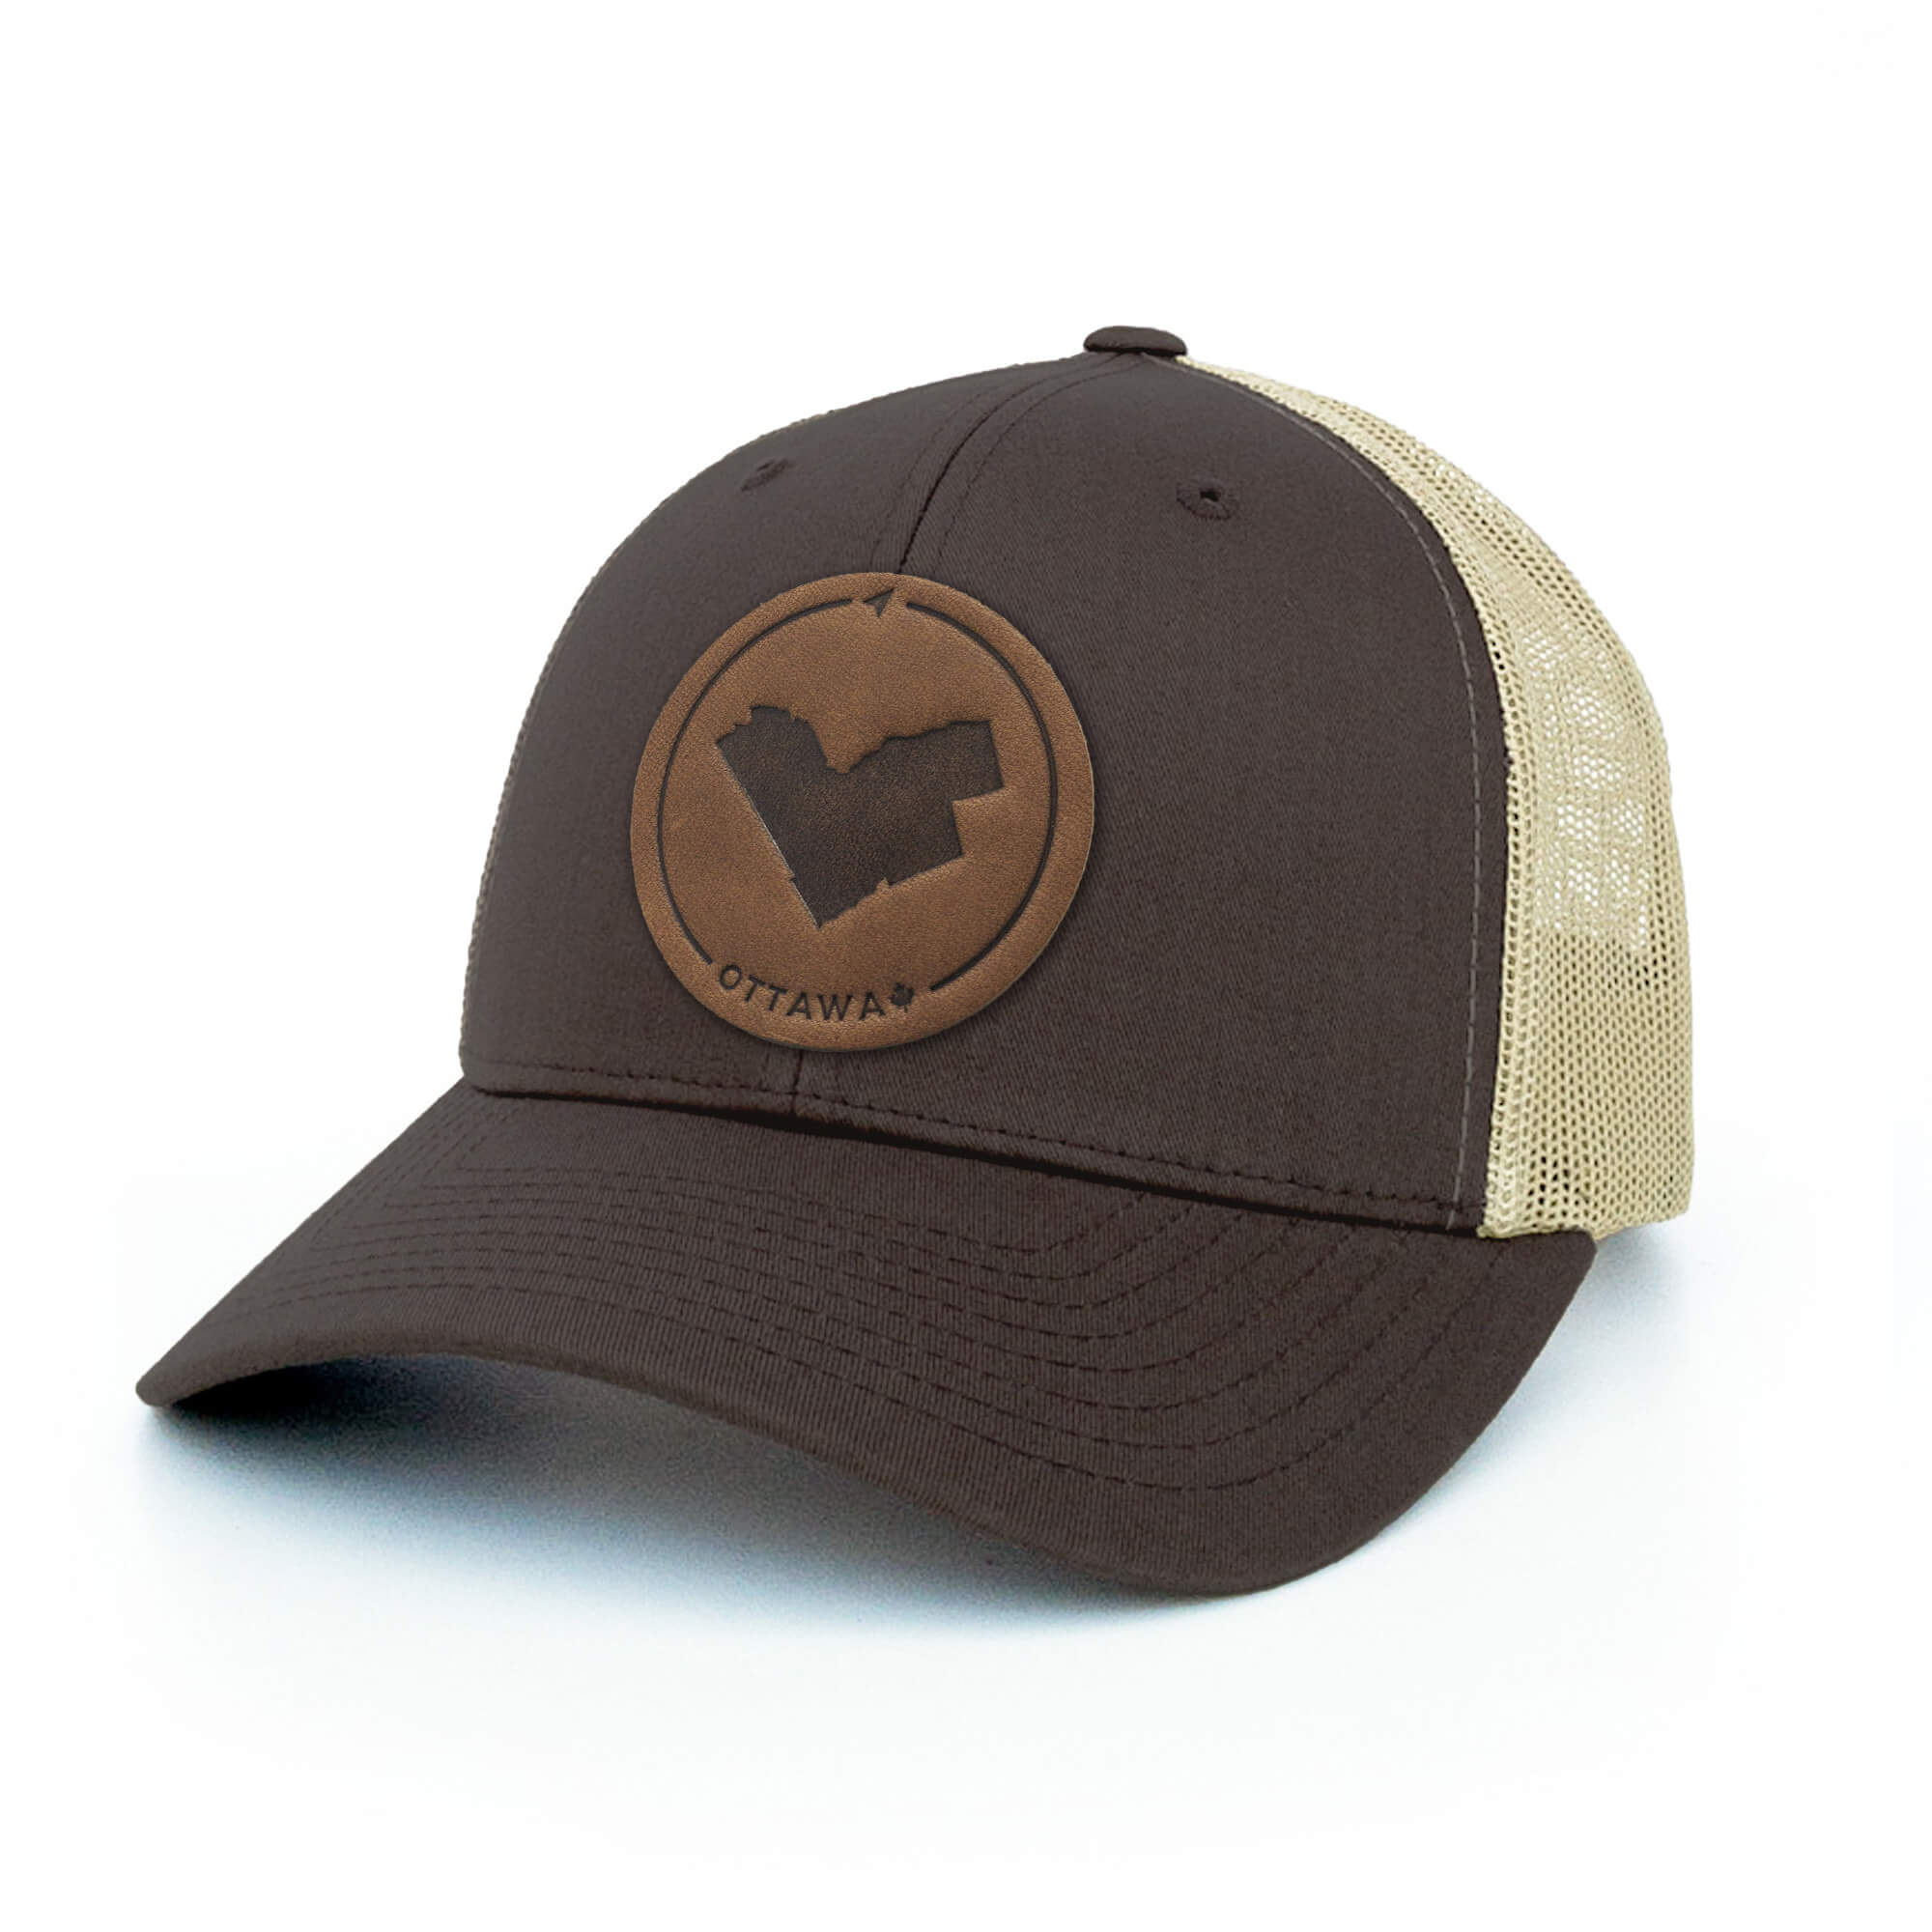 Brown and khaki trucker hat with full-grain leather patch of Ottawa | BLACK-002-007, CHARC-002-007, NAVY-002-007, HGREY-002-007, MOSS-002-007, BROWN-002-007